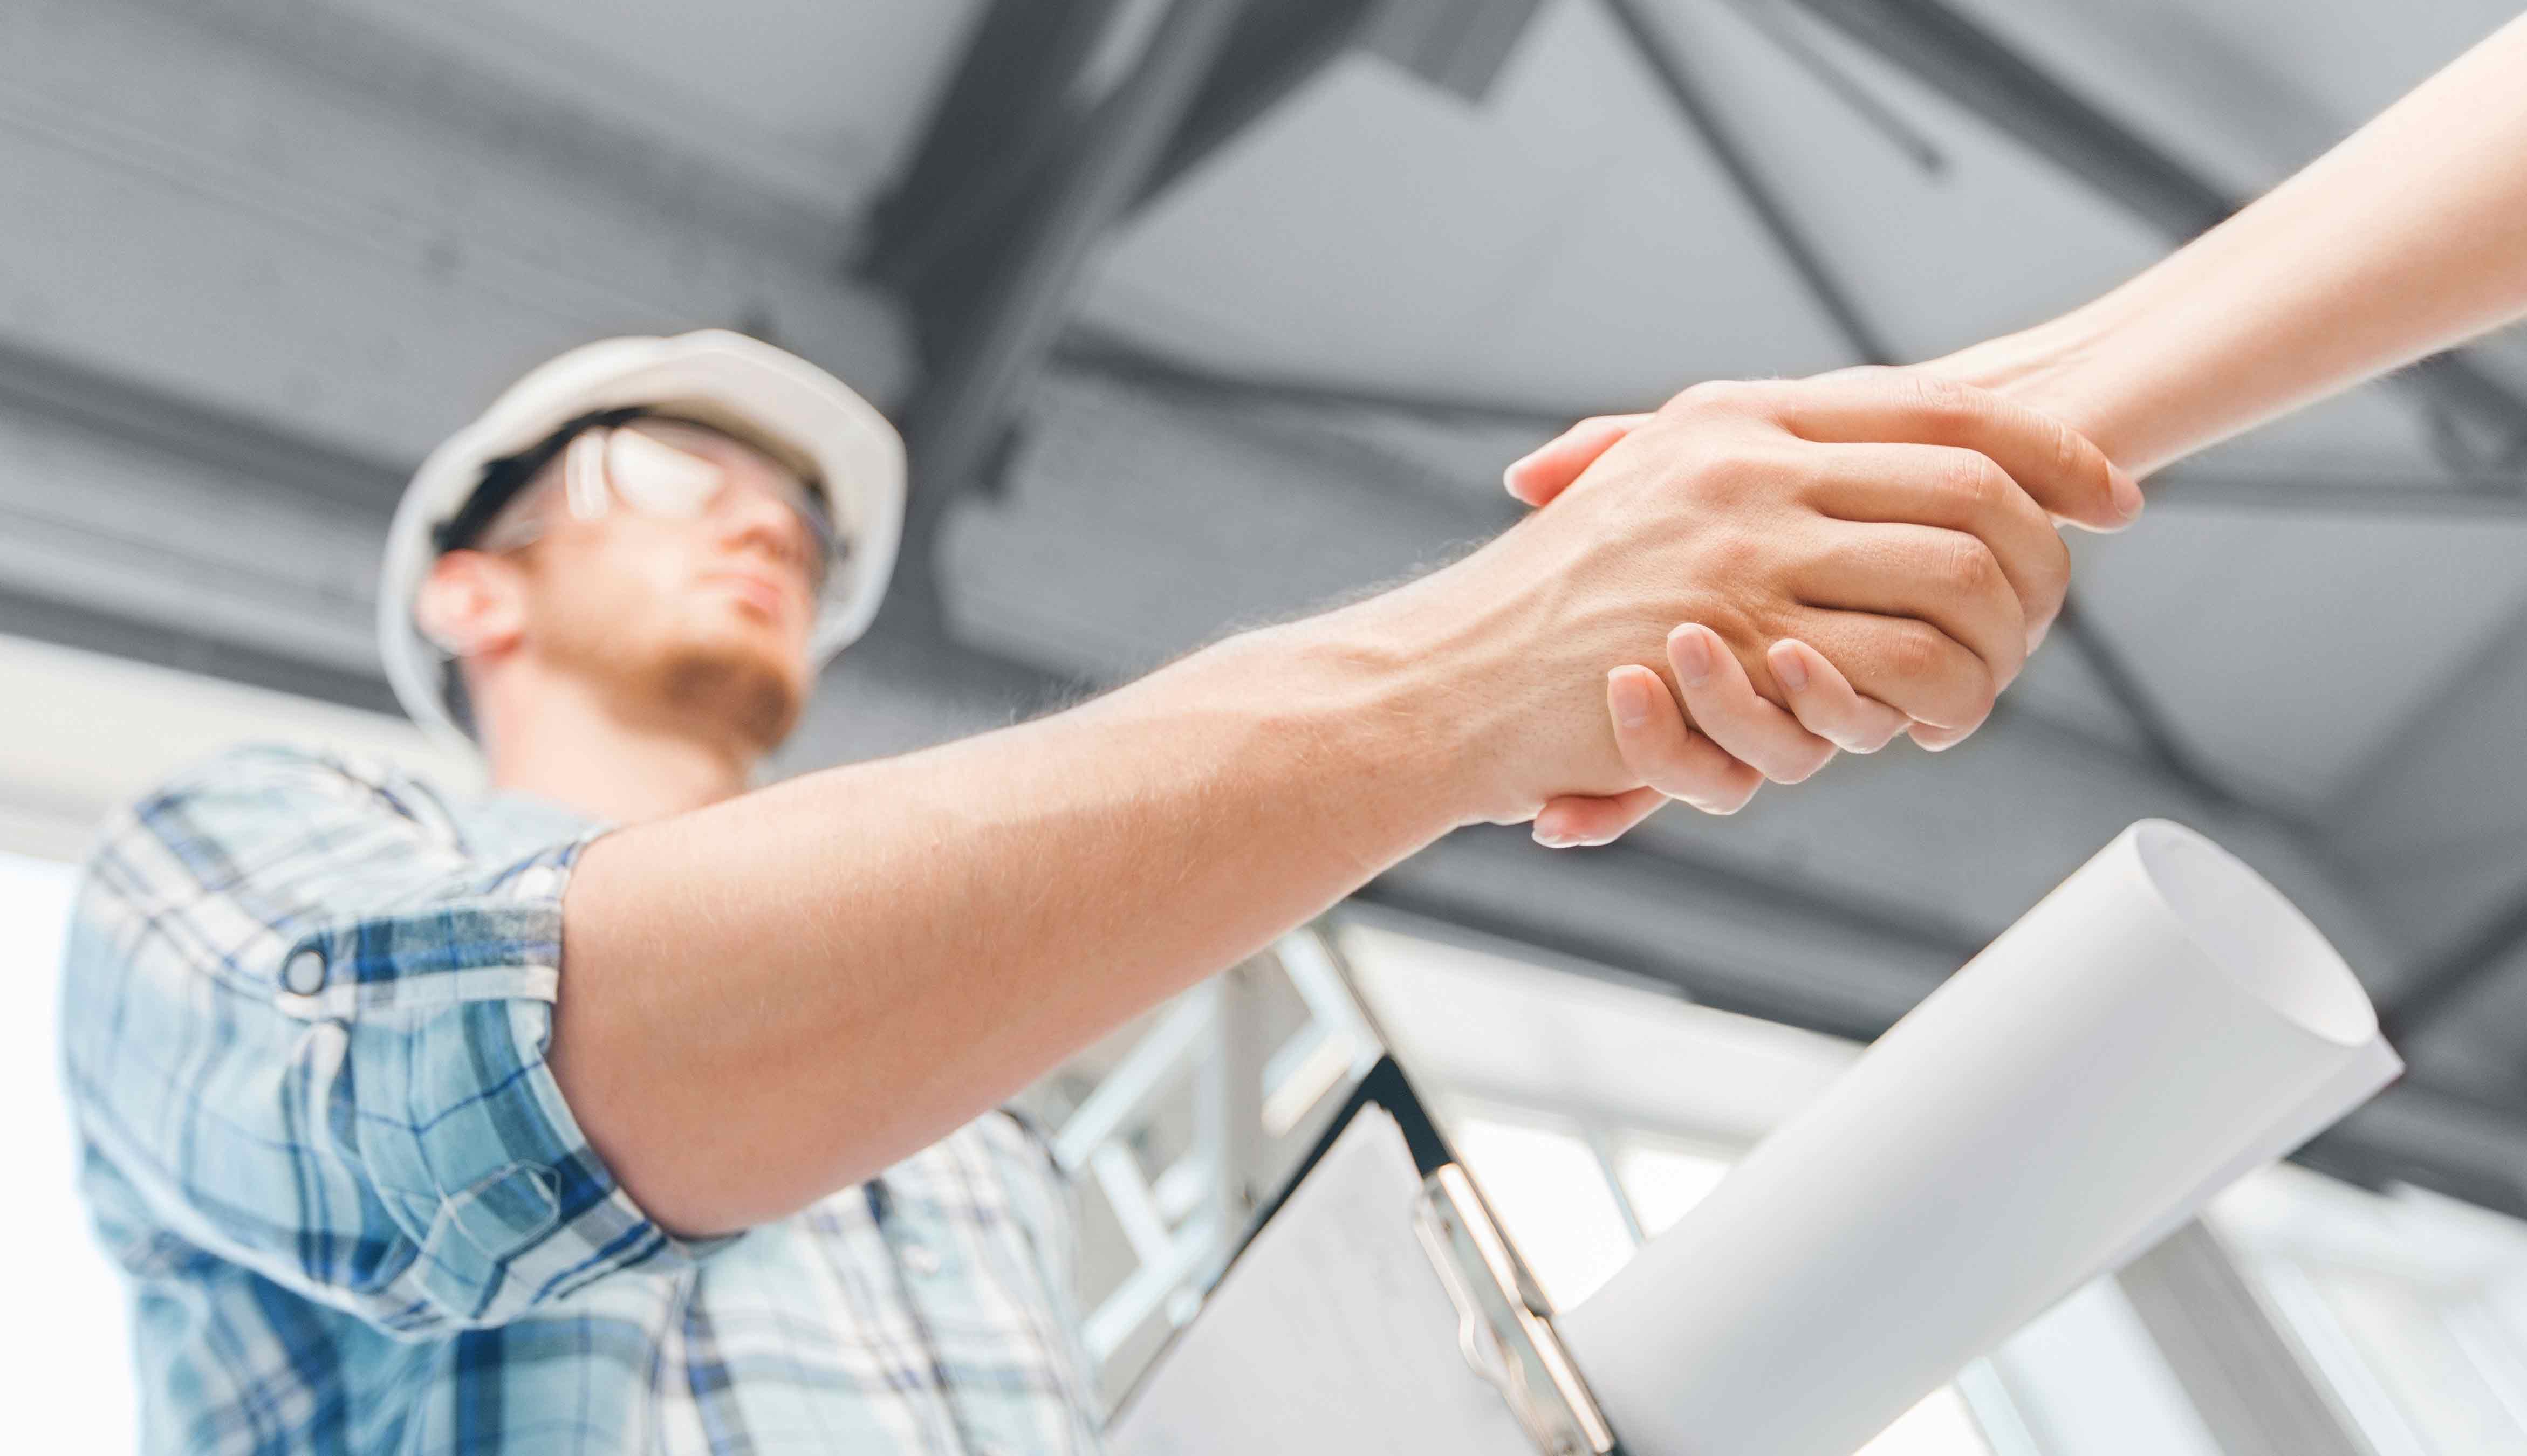 contractor shaking hands with a customer